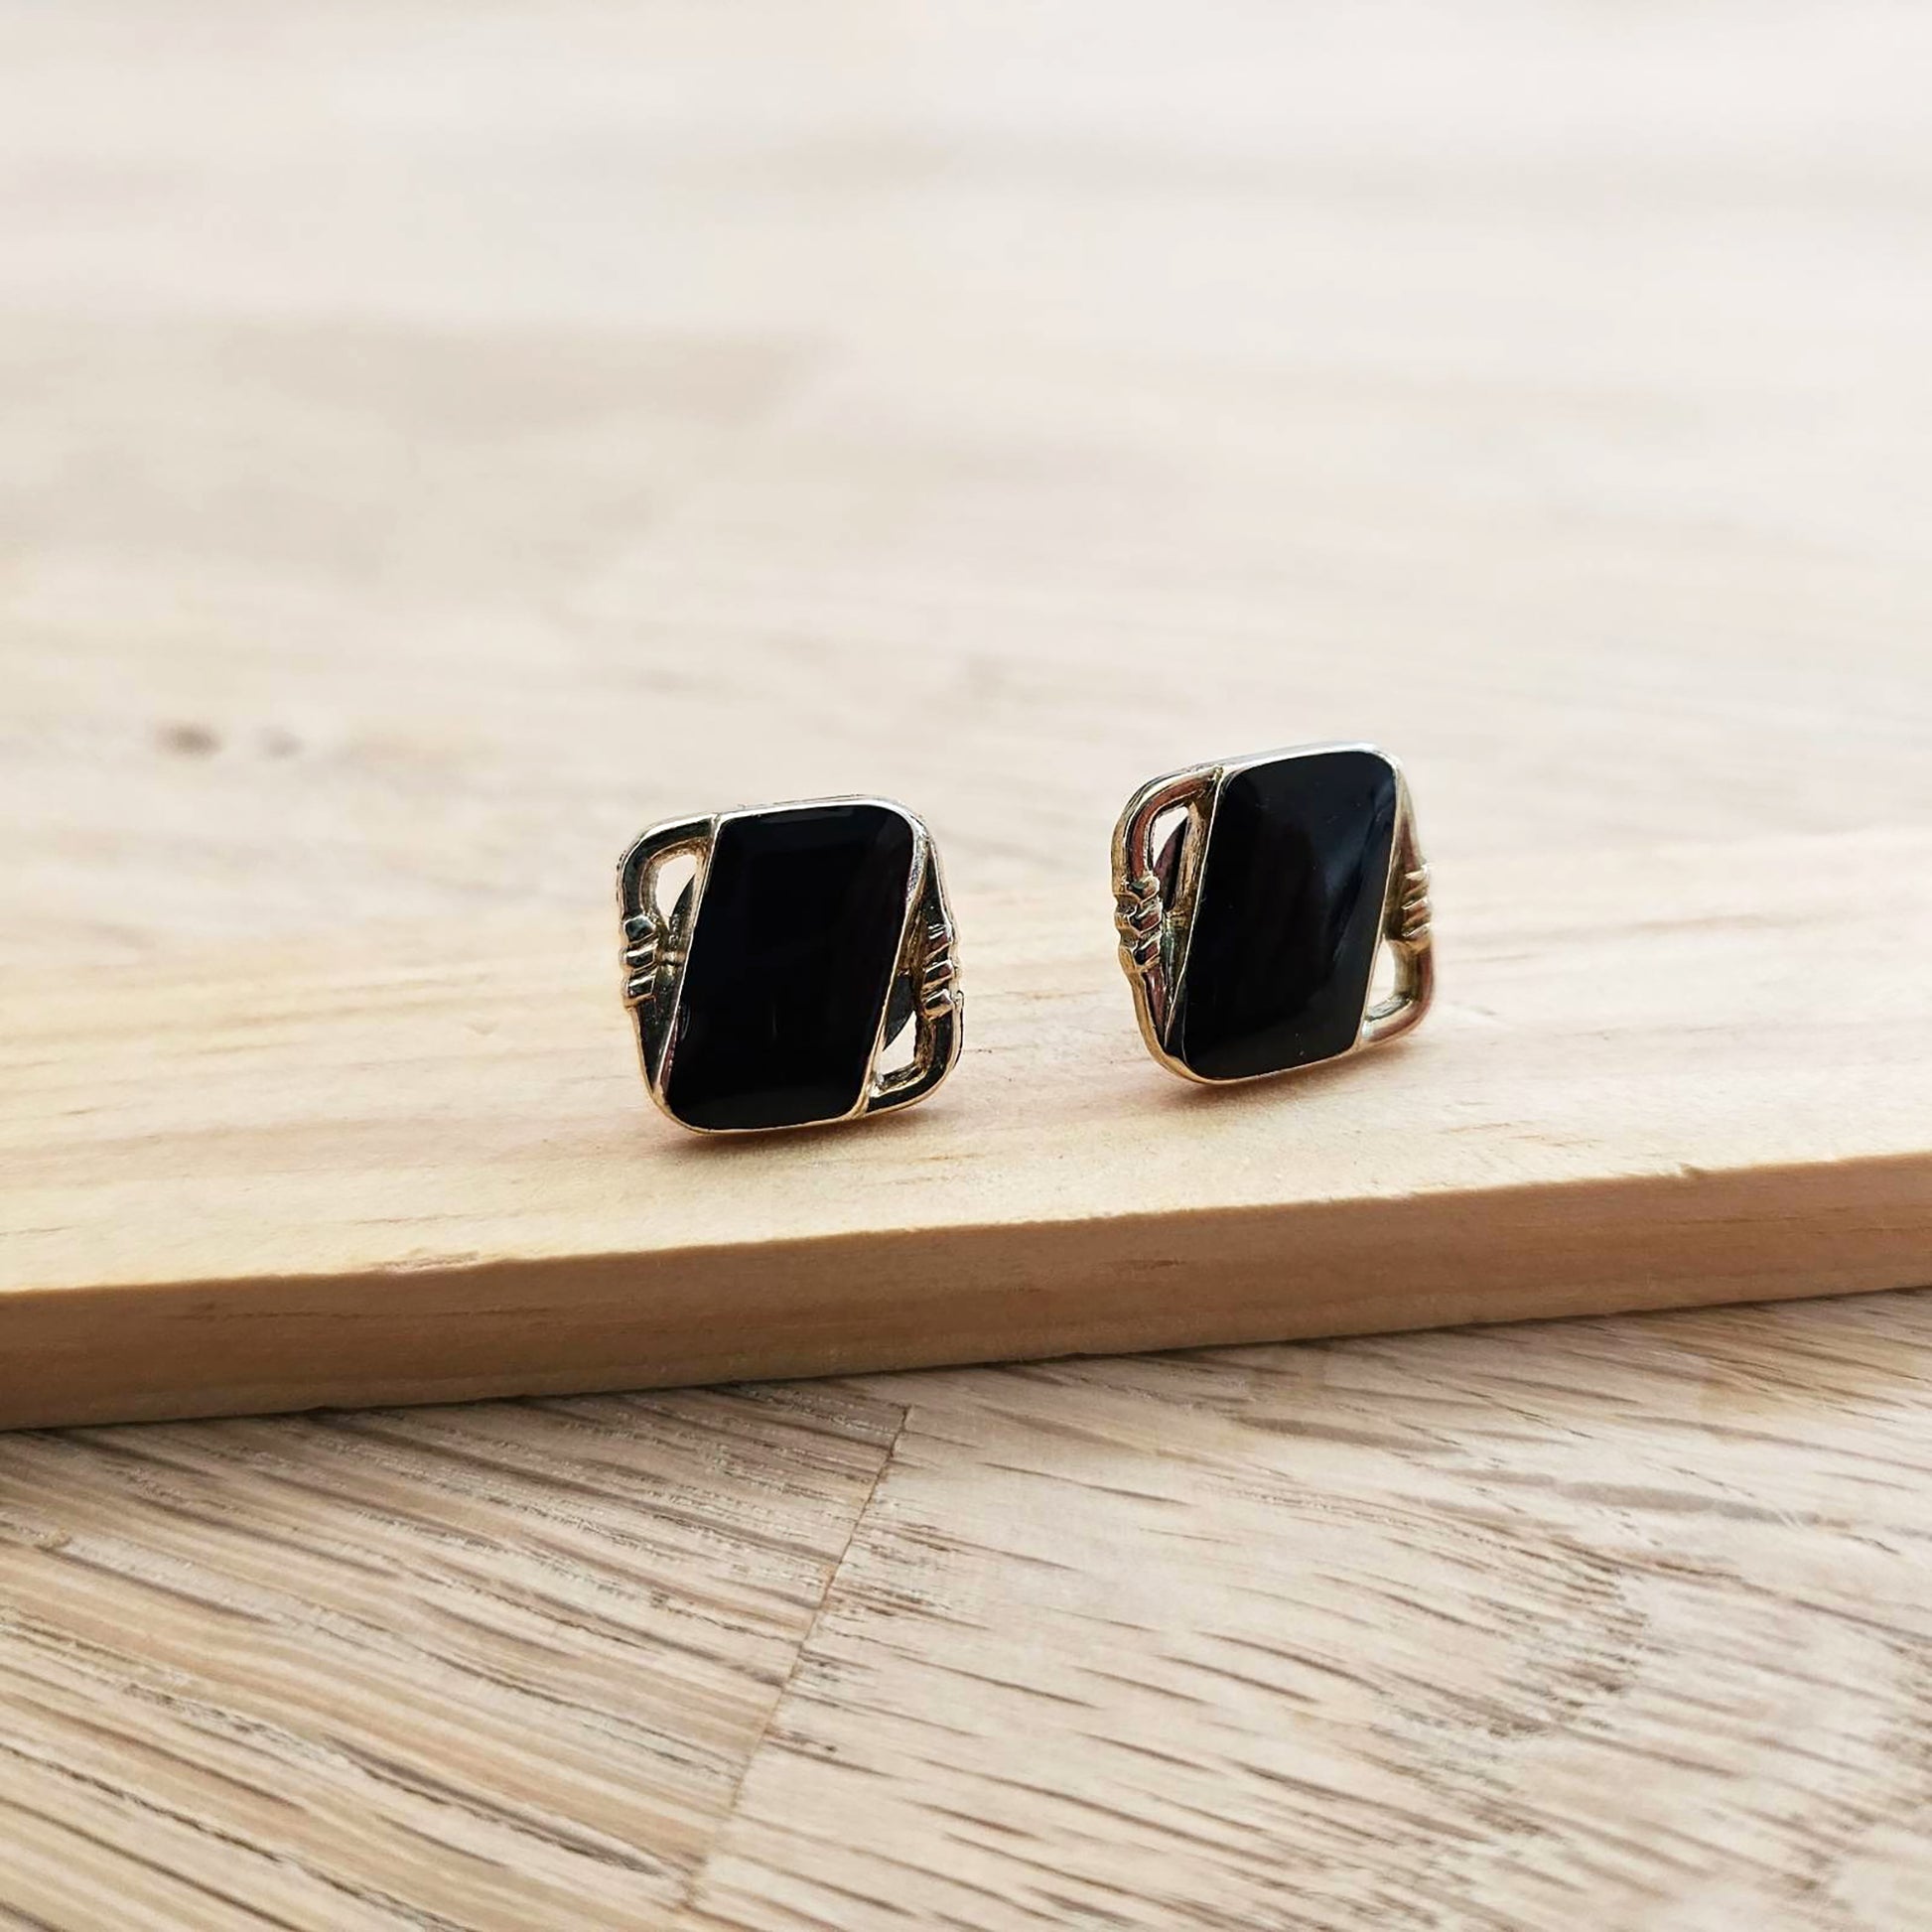 Black Stud earrings, Rectangular post, Upcycled vintage button